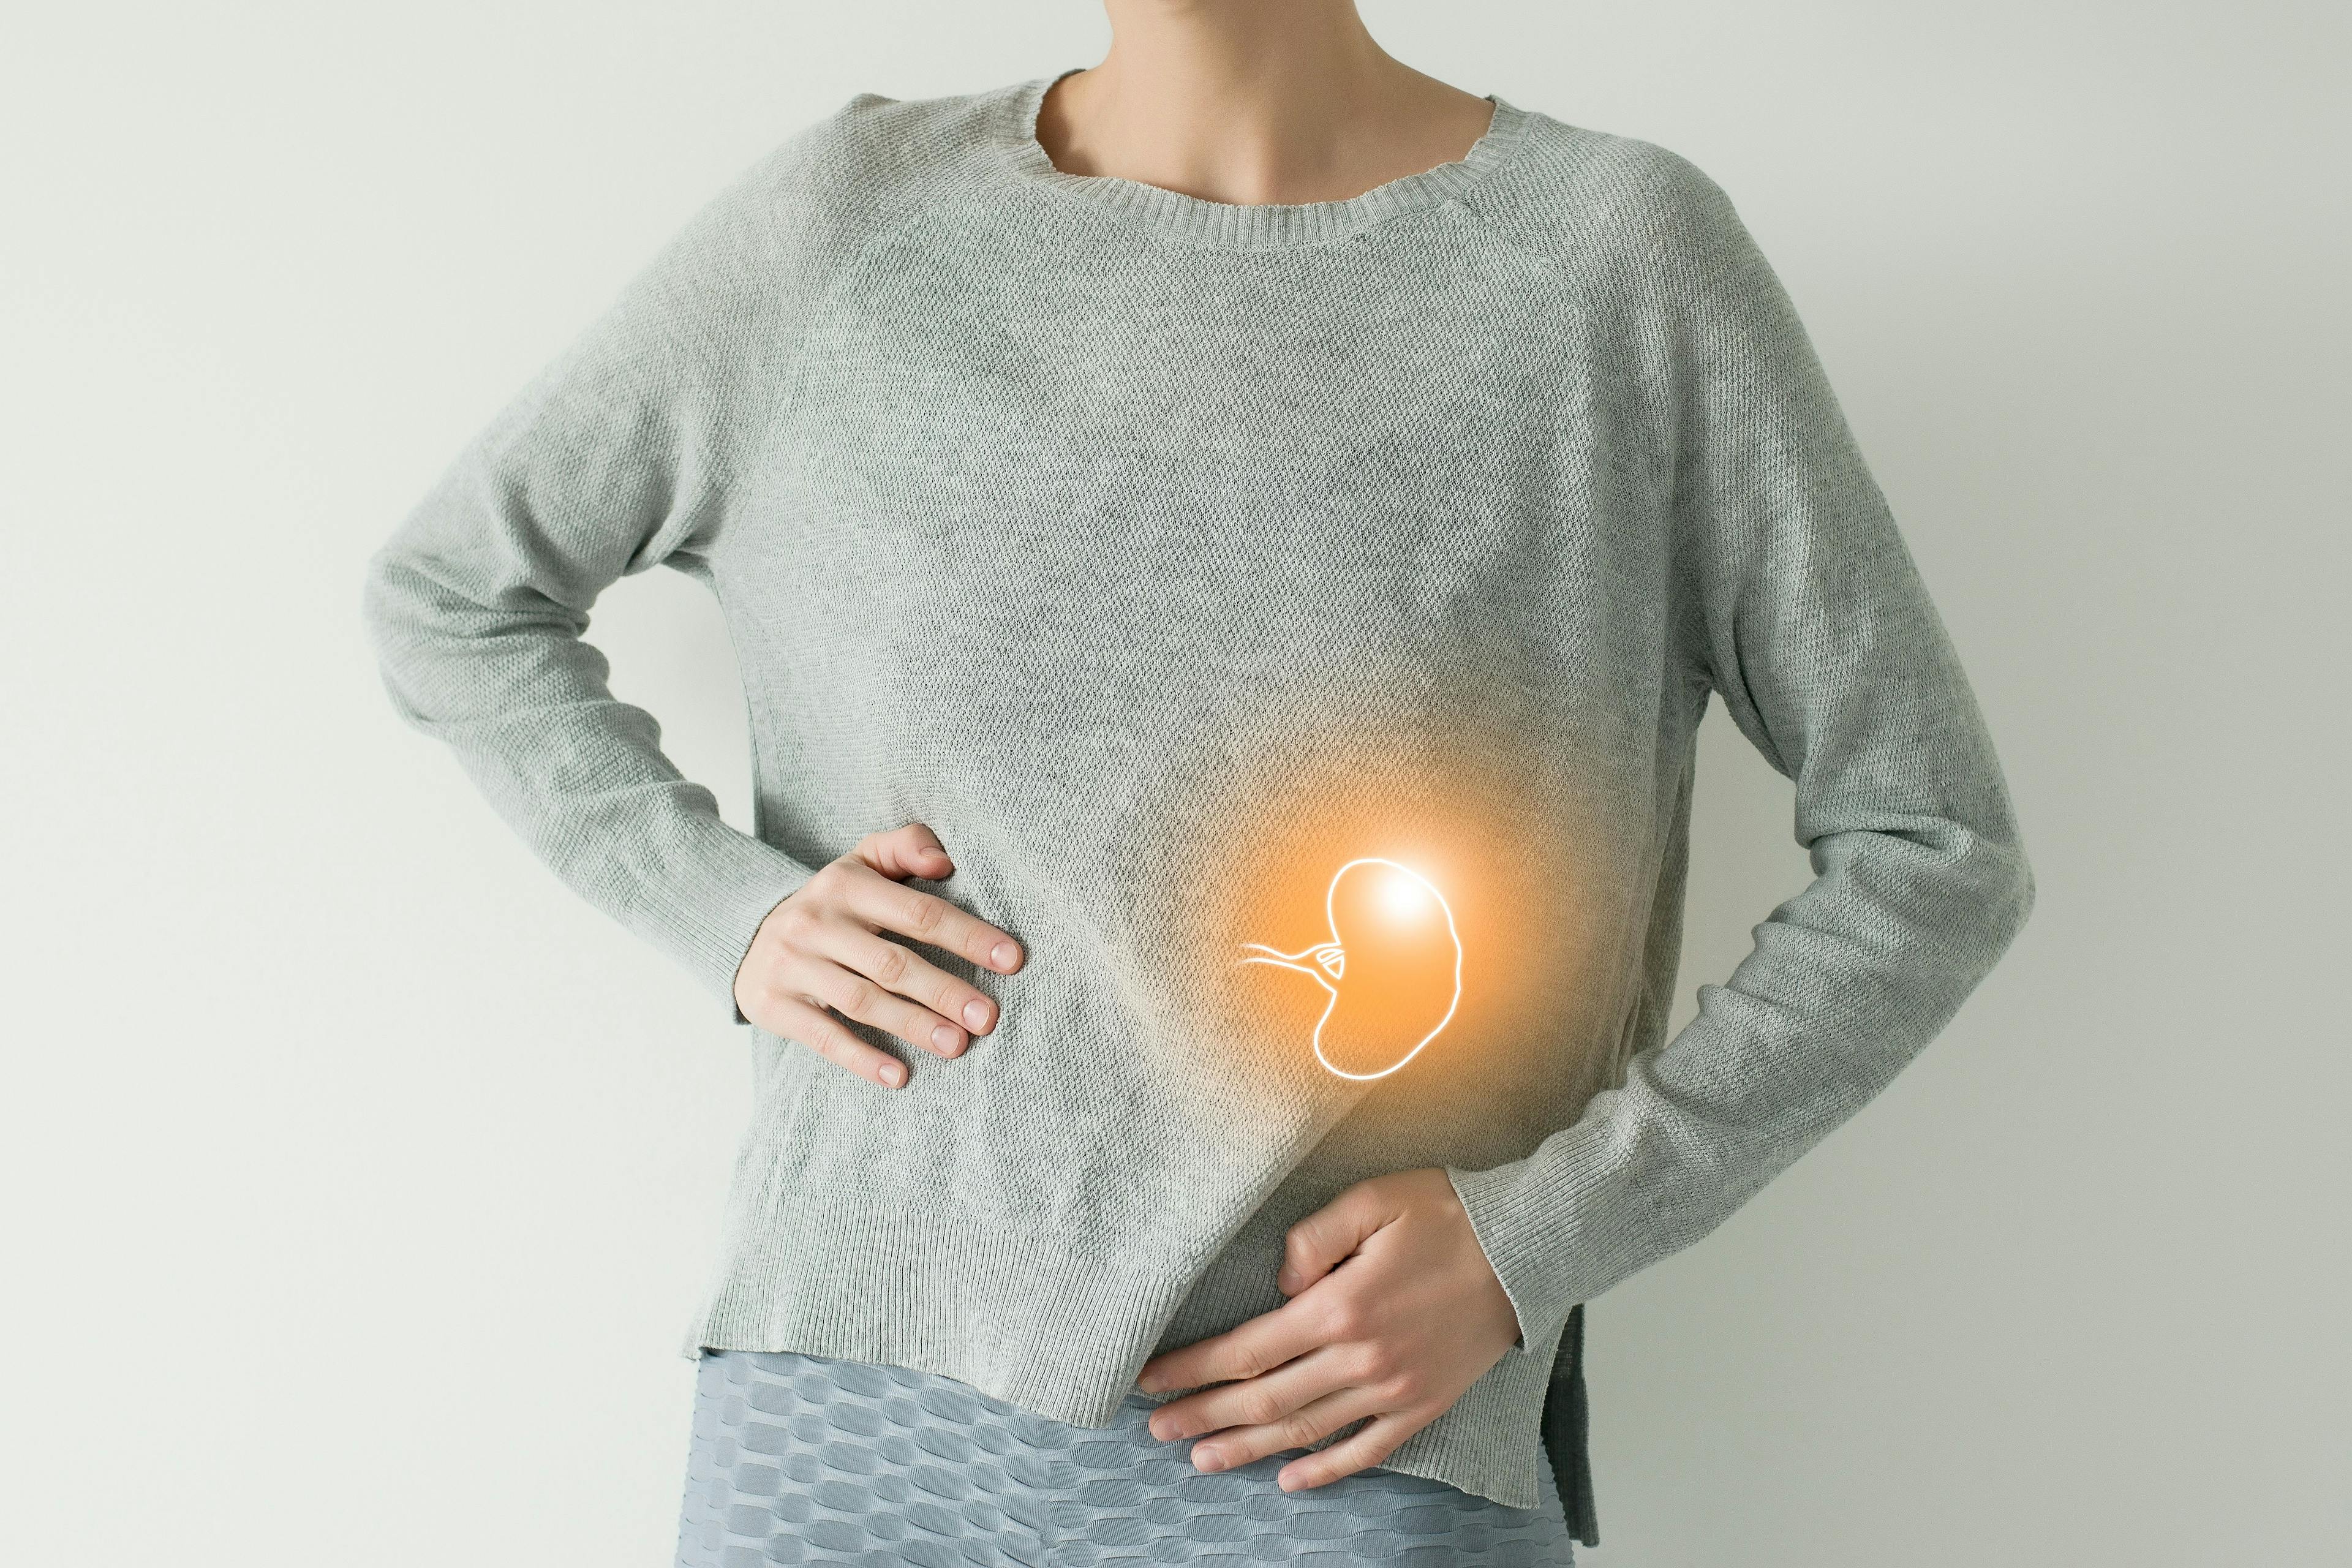 Woman in casual grey clothes suffering from indigestion pain, highlighted vector visualisation of spleen | Image credit: © transurfer - © stock.adobe.com